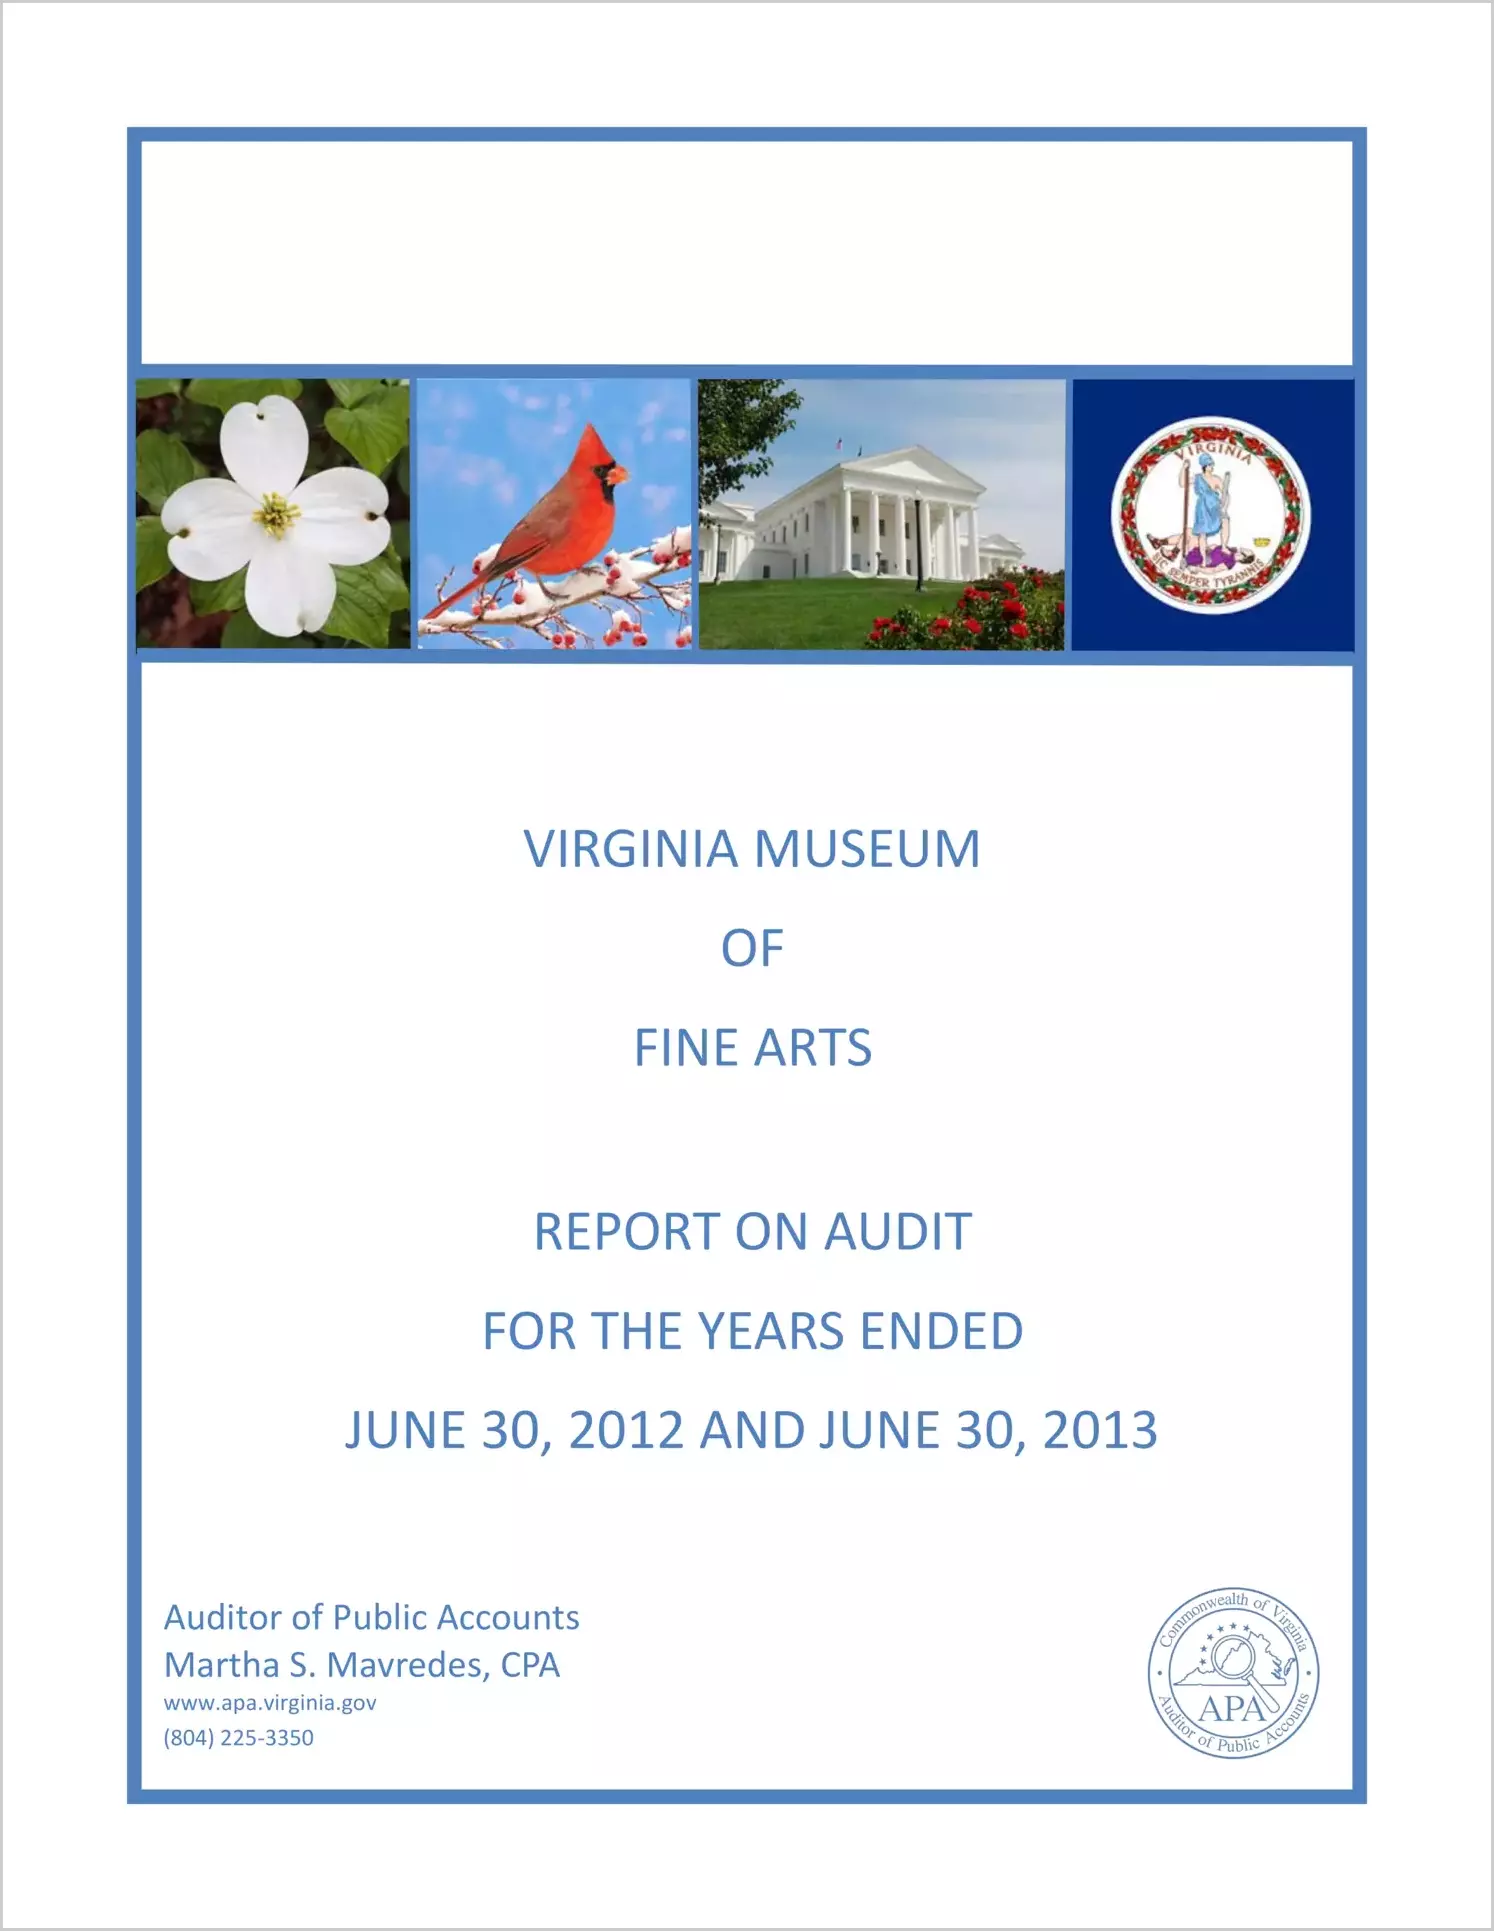 Virginia Museum of Fine Arts for the years ended June 30, 2012 and June 30, 2013